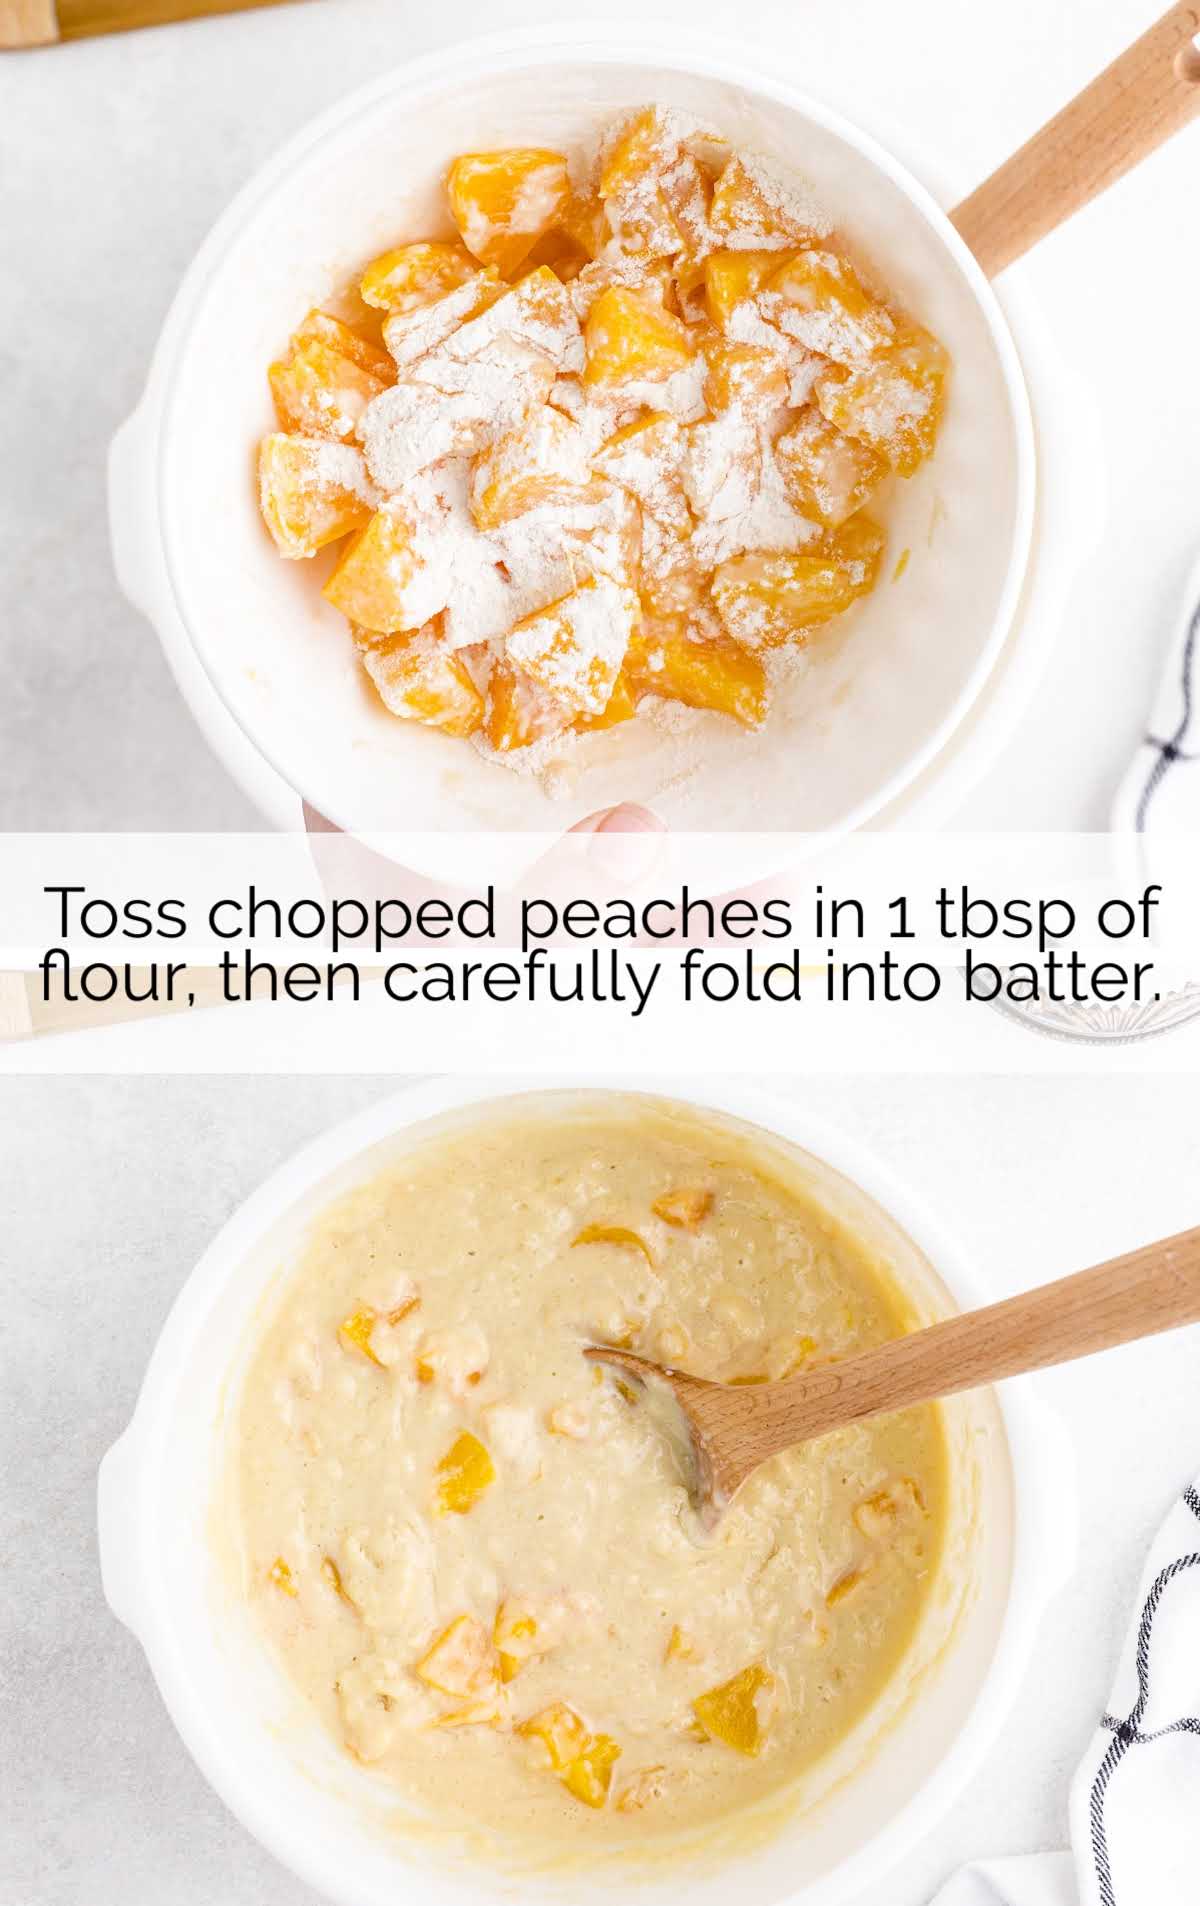 sliced peaches and flour ion a bowl and then folded together in a bowl